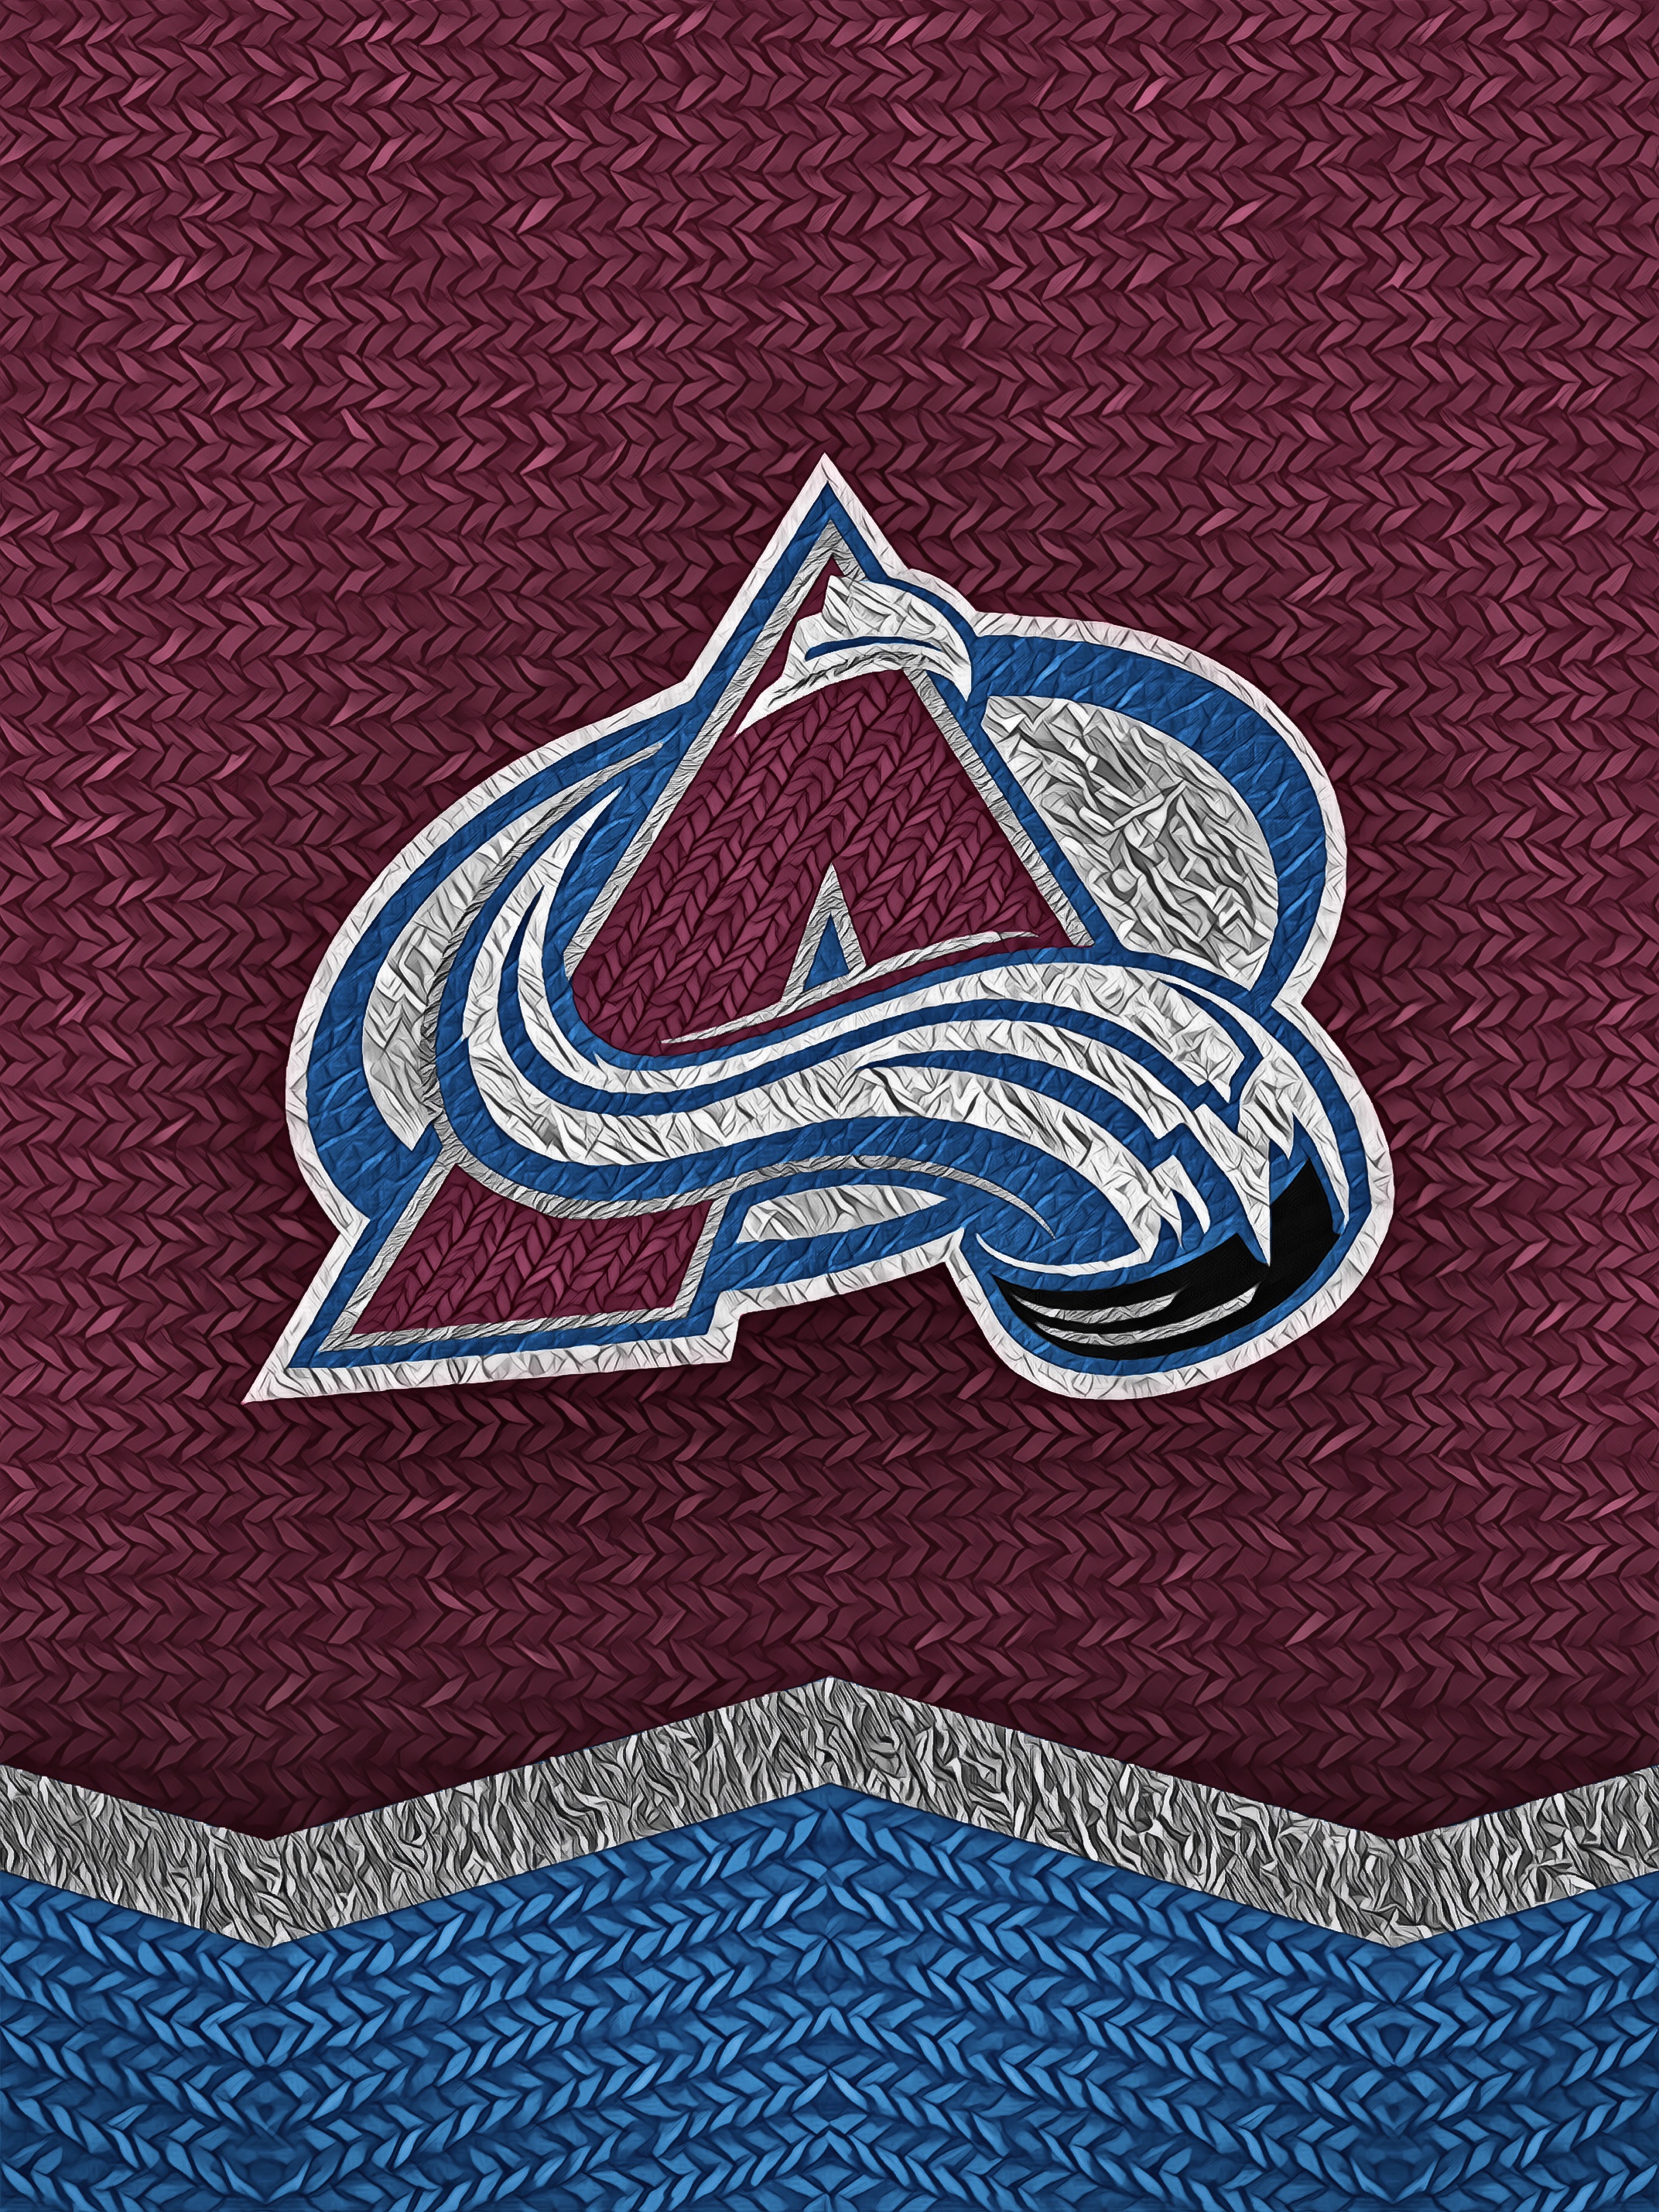 Colorado Avalanche wallpaper by Densports  Download on ZEDGE  7a09